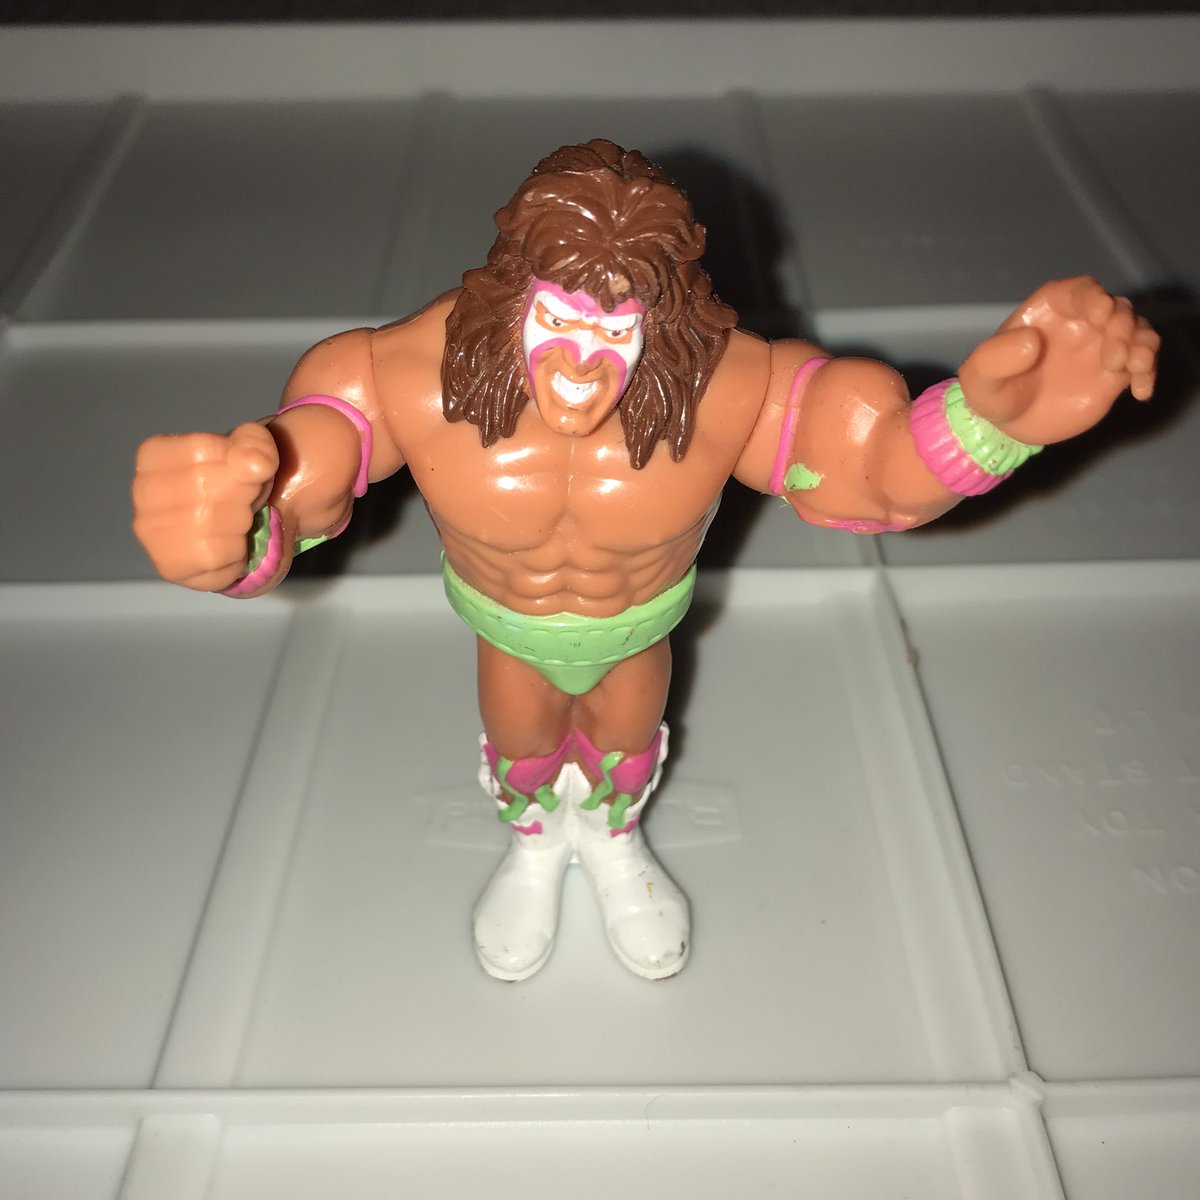 Merry Christmas from my 1990 #UltimateWarrior with “Ultimate Smash Move” from #TitanSports!